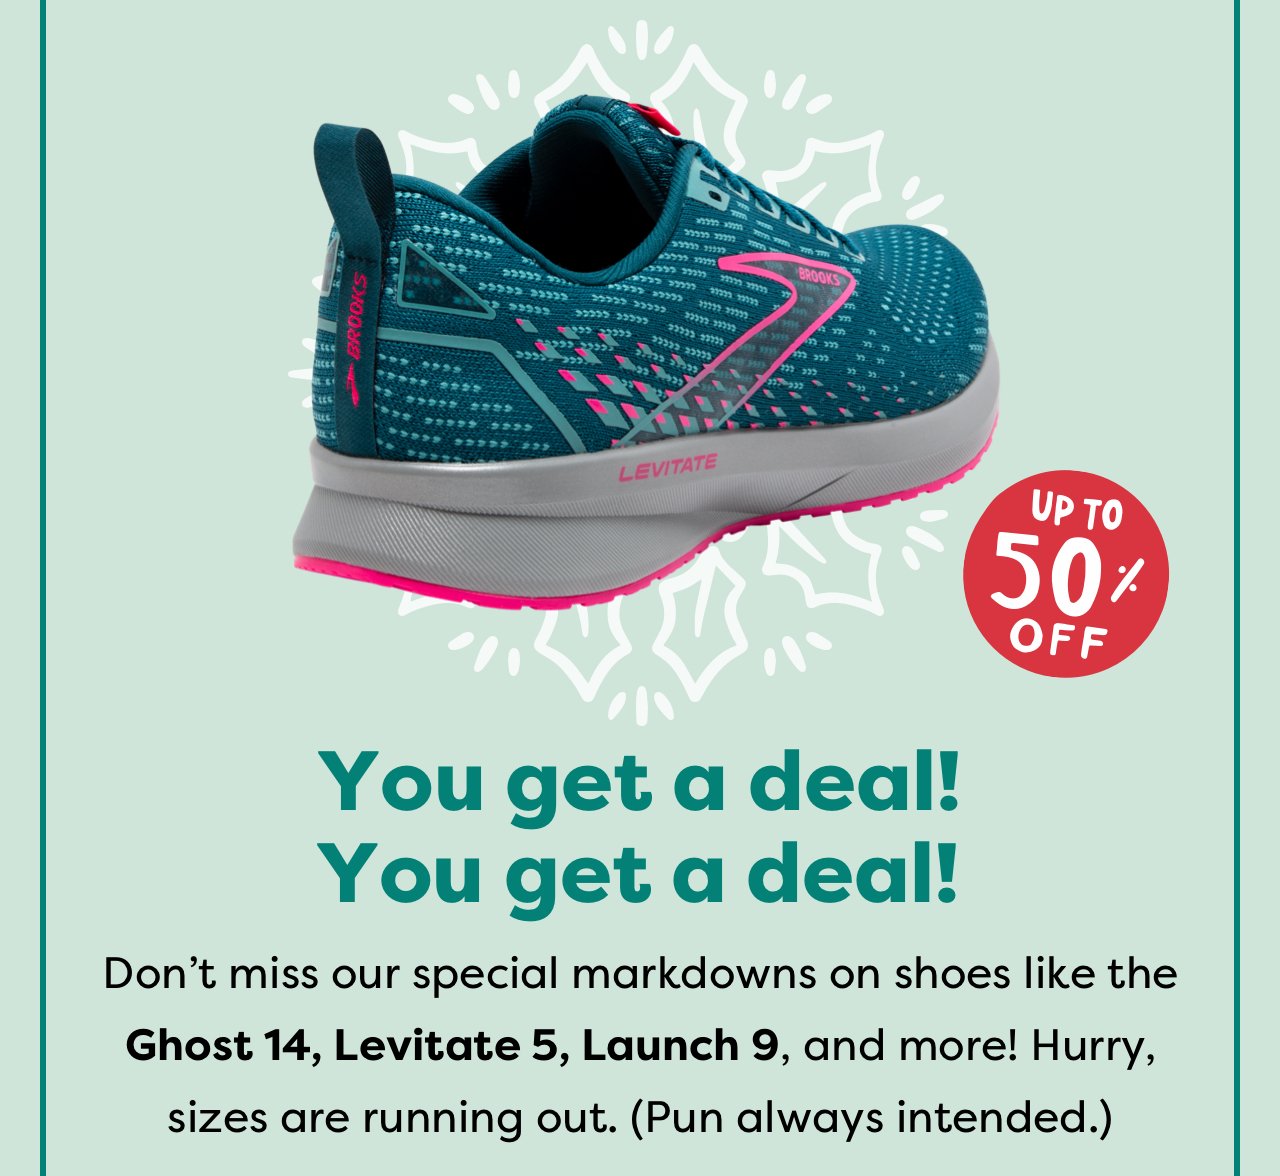 UP TO 50% OFF | You get a deal! You get a deal! | Don't miss our special markdowns on shoes like the Ghost 14, Levitate 5, Launch 9, and more! Hurry, sizes are running out. (Pun always intended.)